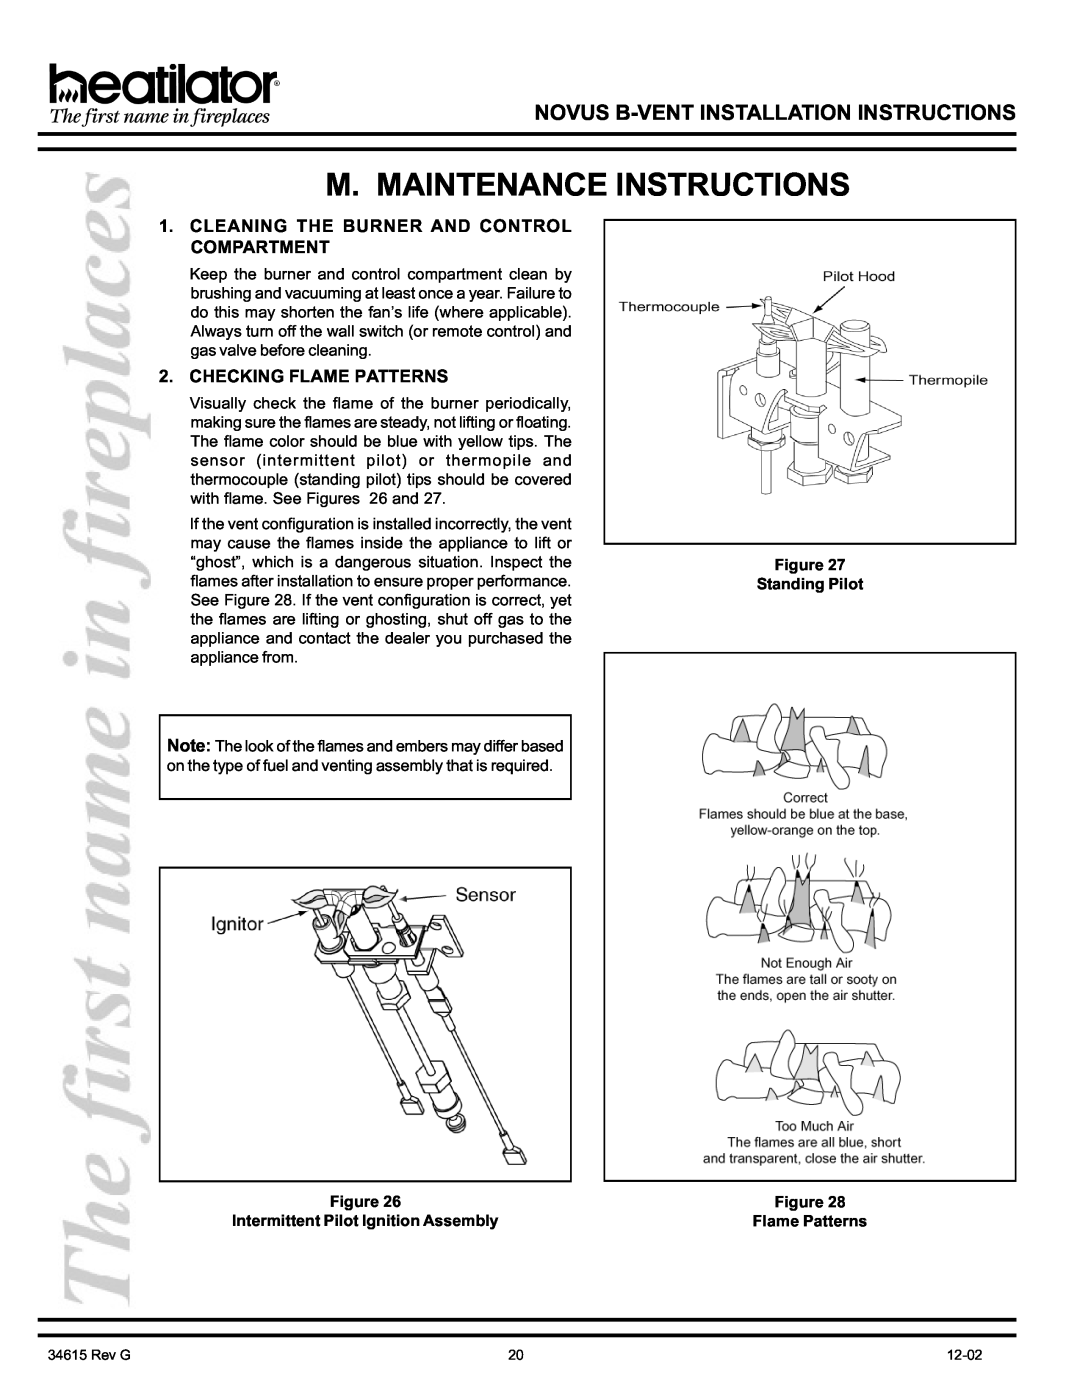 Hearth and Home Technologies GNBC33, GNBC30 manual M. Maintenance Instructions, Cleaning The Burner And Control Compartment 